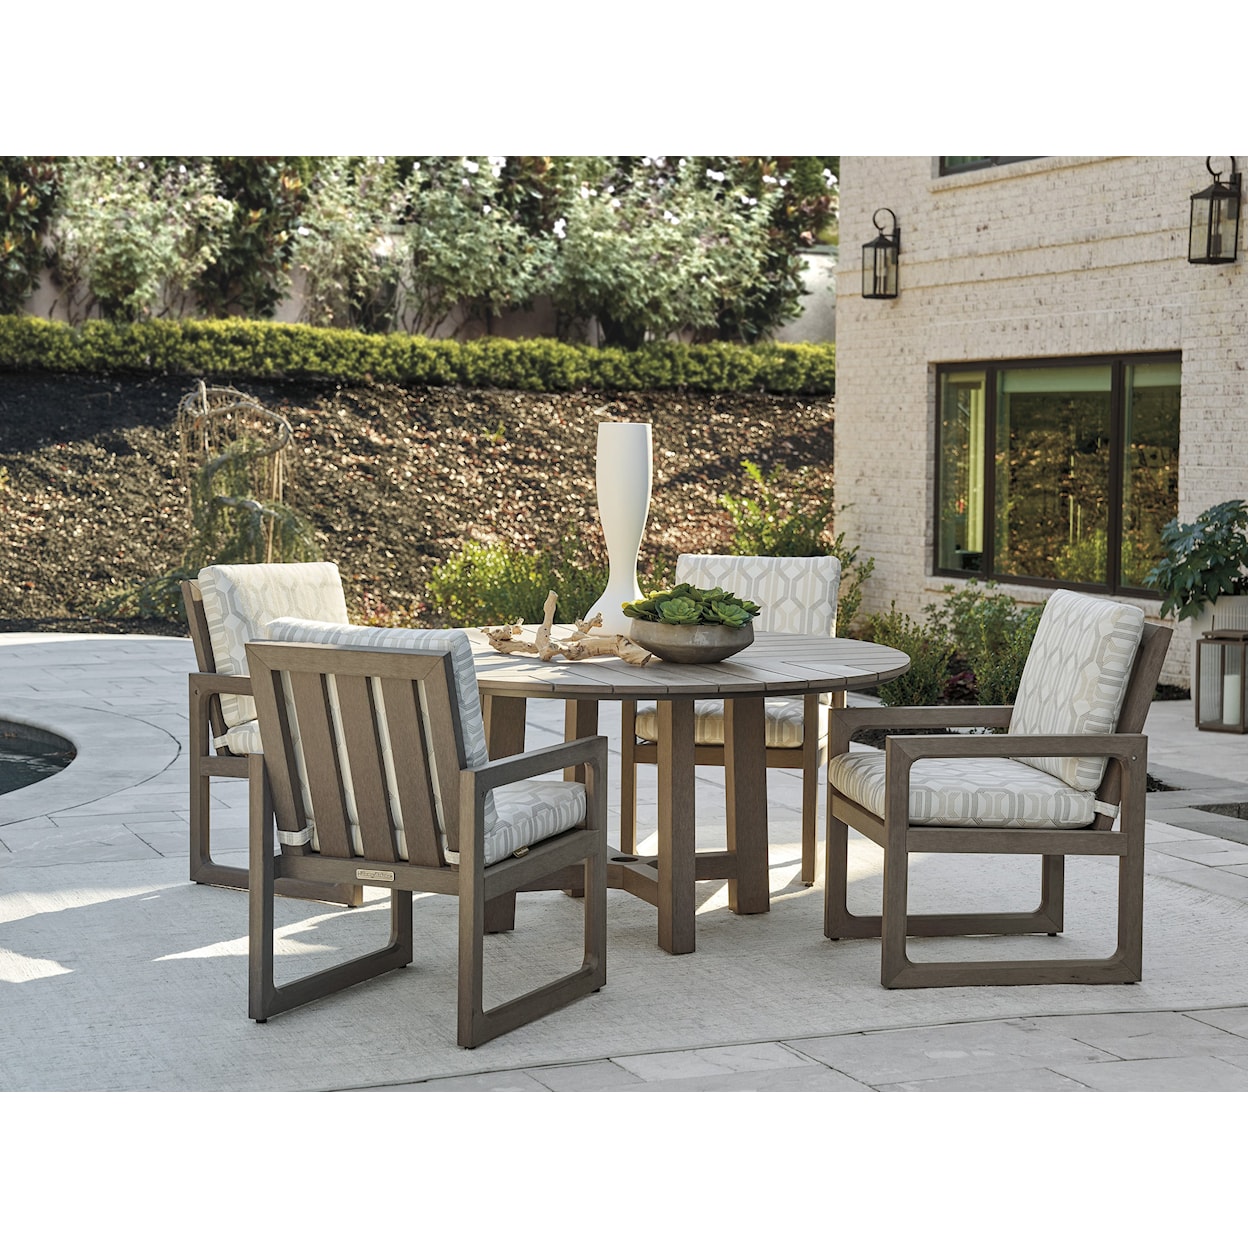 Tommy Bahama Outdoor Living Mozambique 5-Piece Outdoor Dining Set